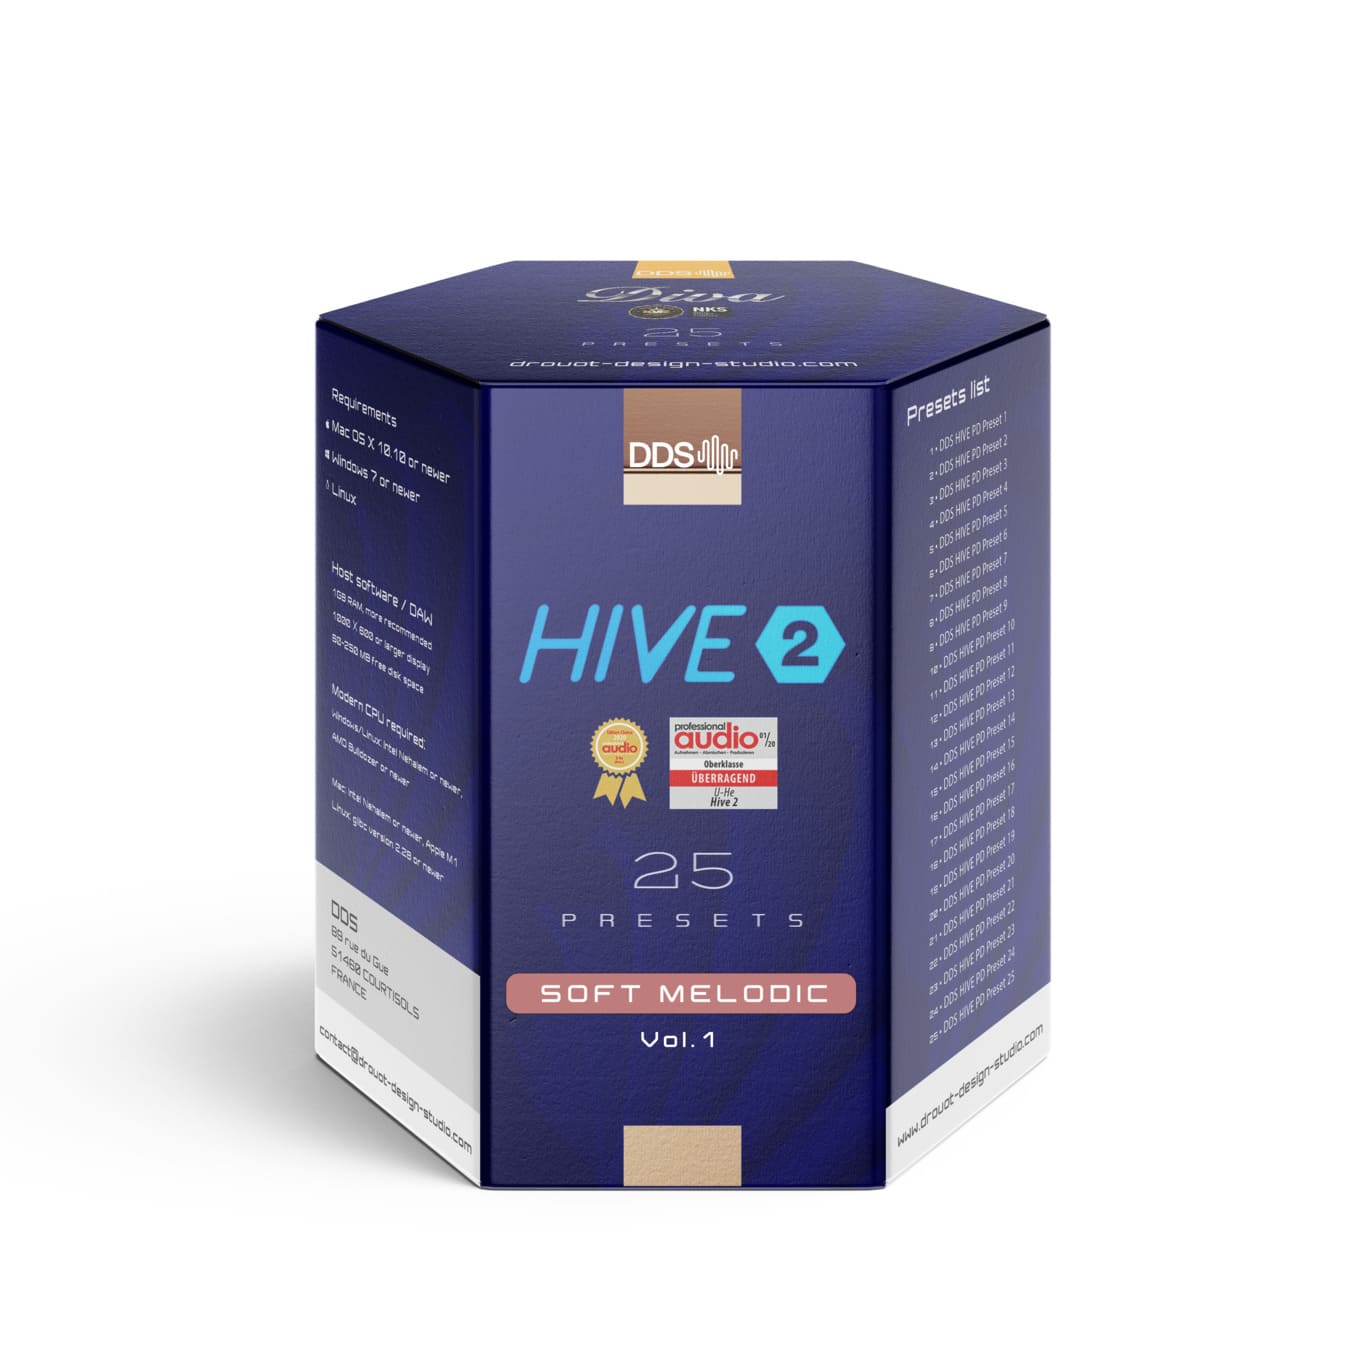 HIVE 2 - Soft Melodic - 25 presets pack - Vol. 1